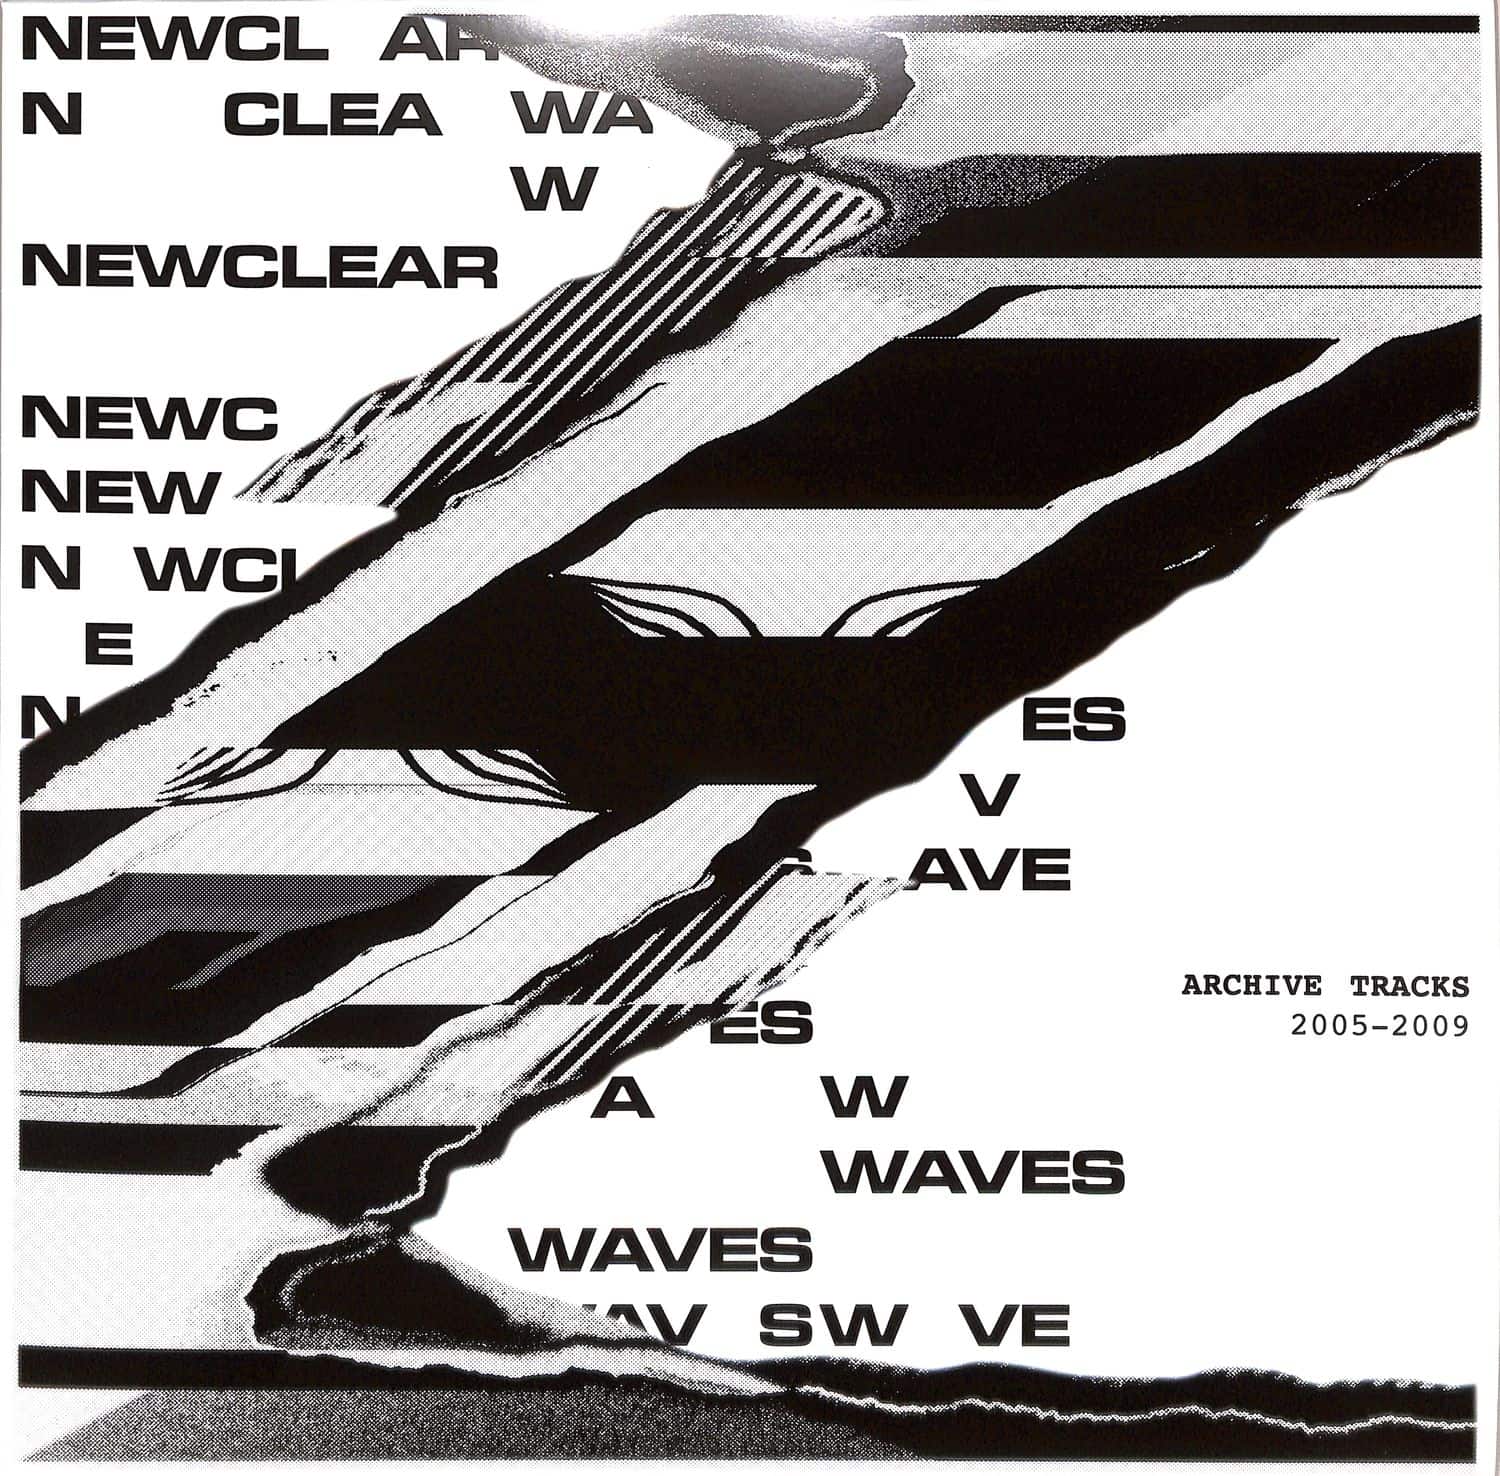 Newclear Waves - ARCHIVE TRACKS 2005-2009 